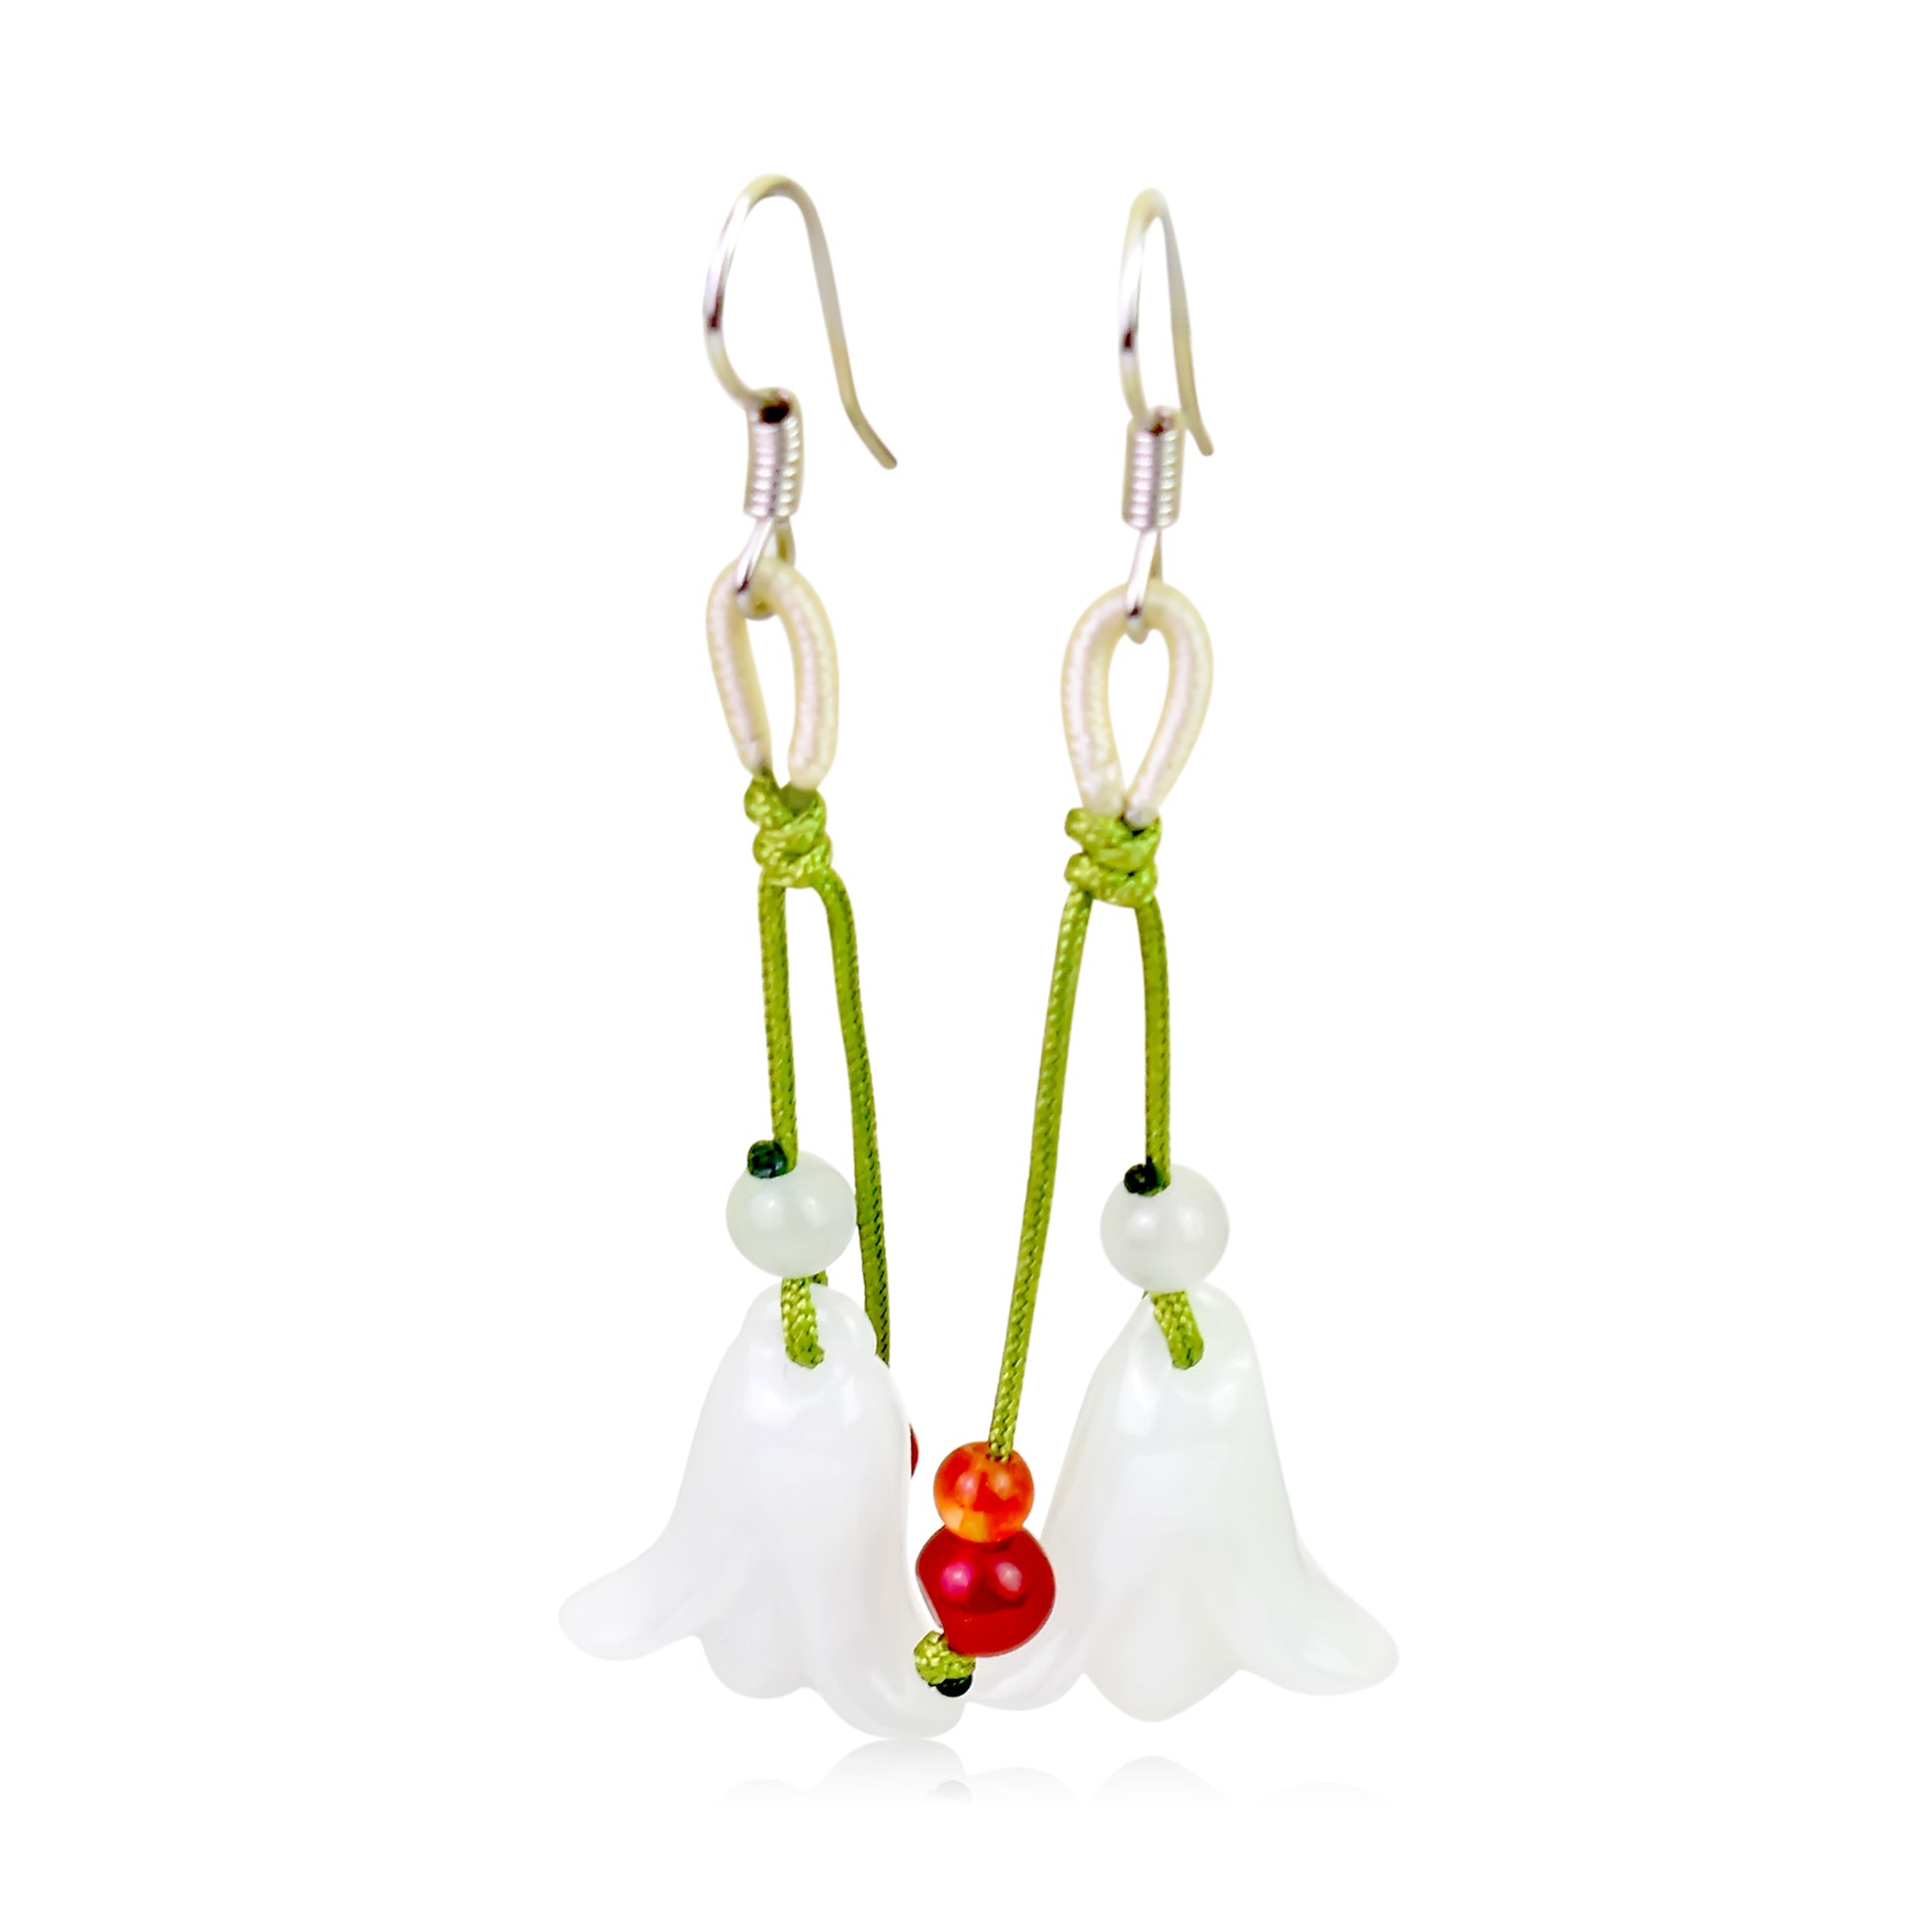 Show Off Your Unique Sense of Style with Bellflower Jade Earrings made with Lime Cord